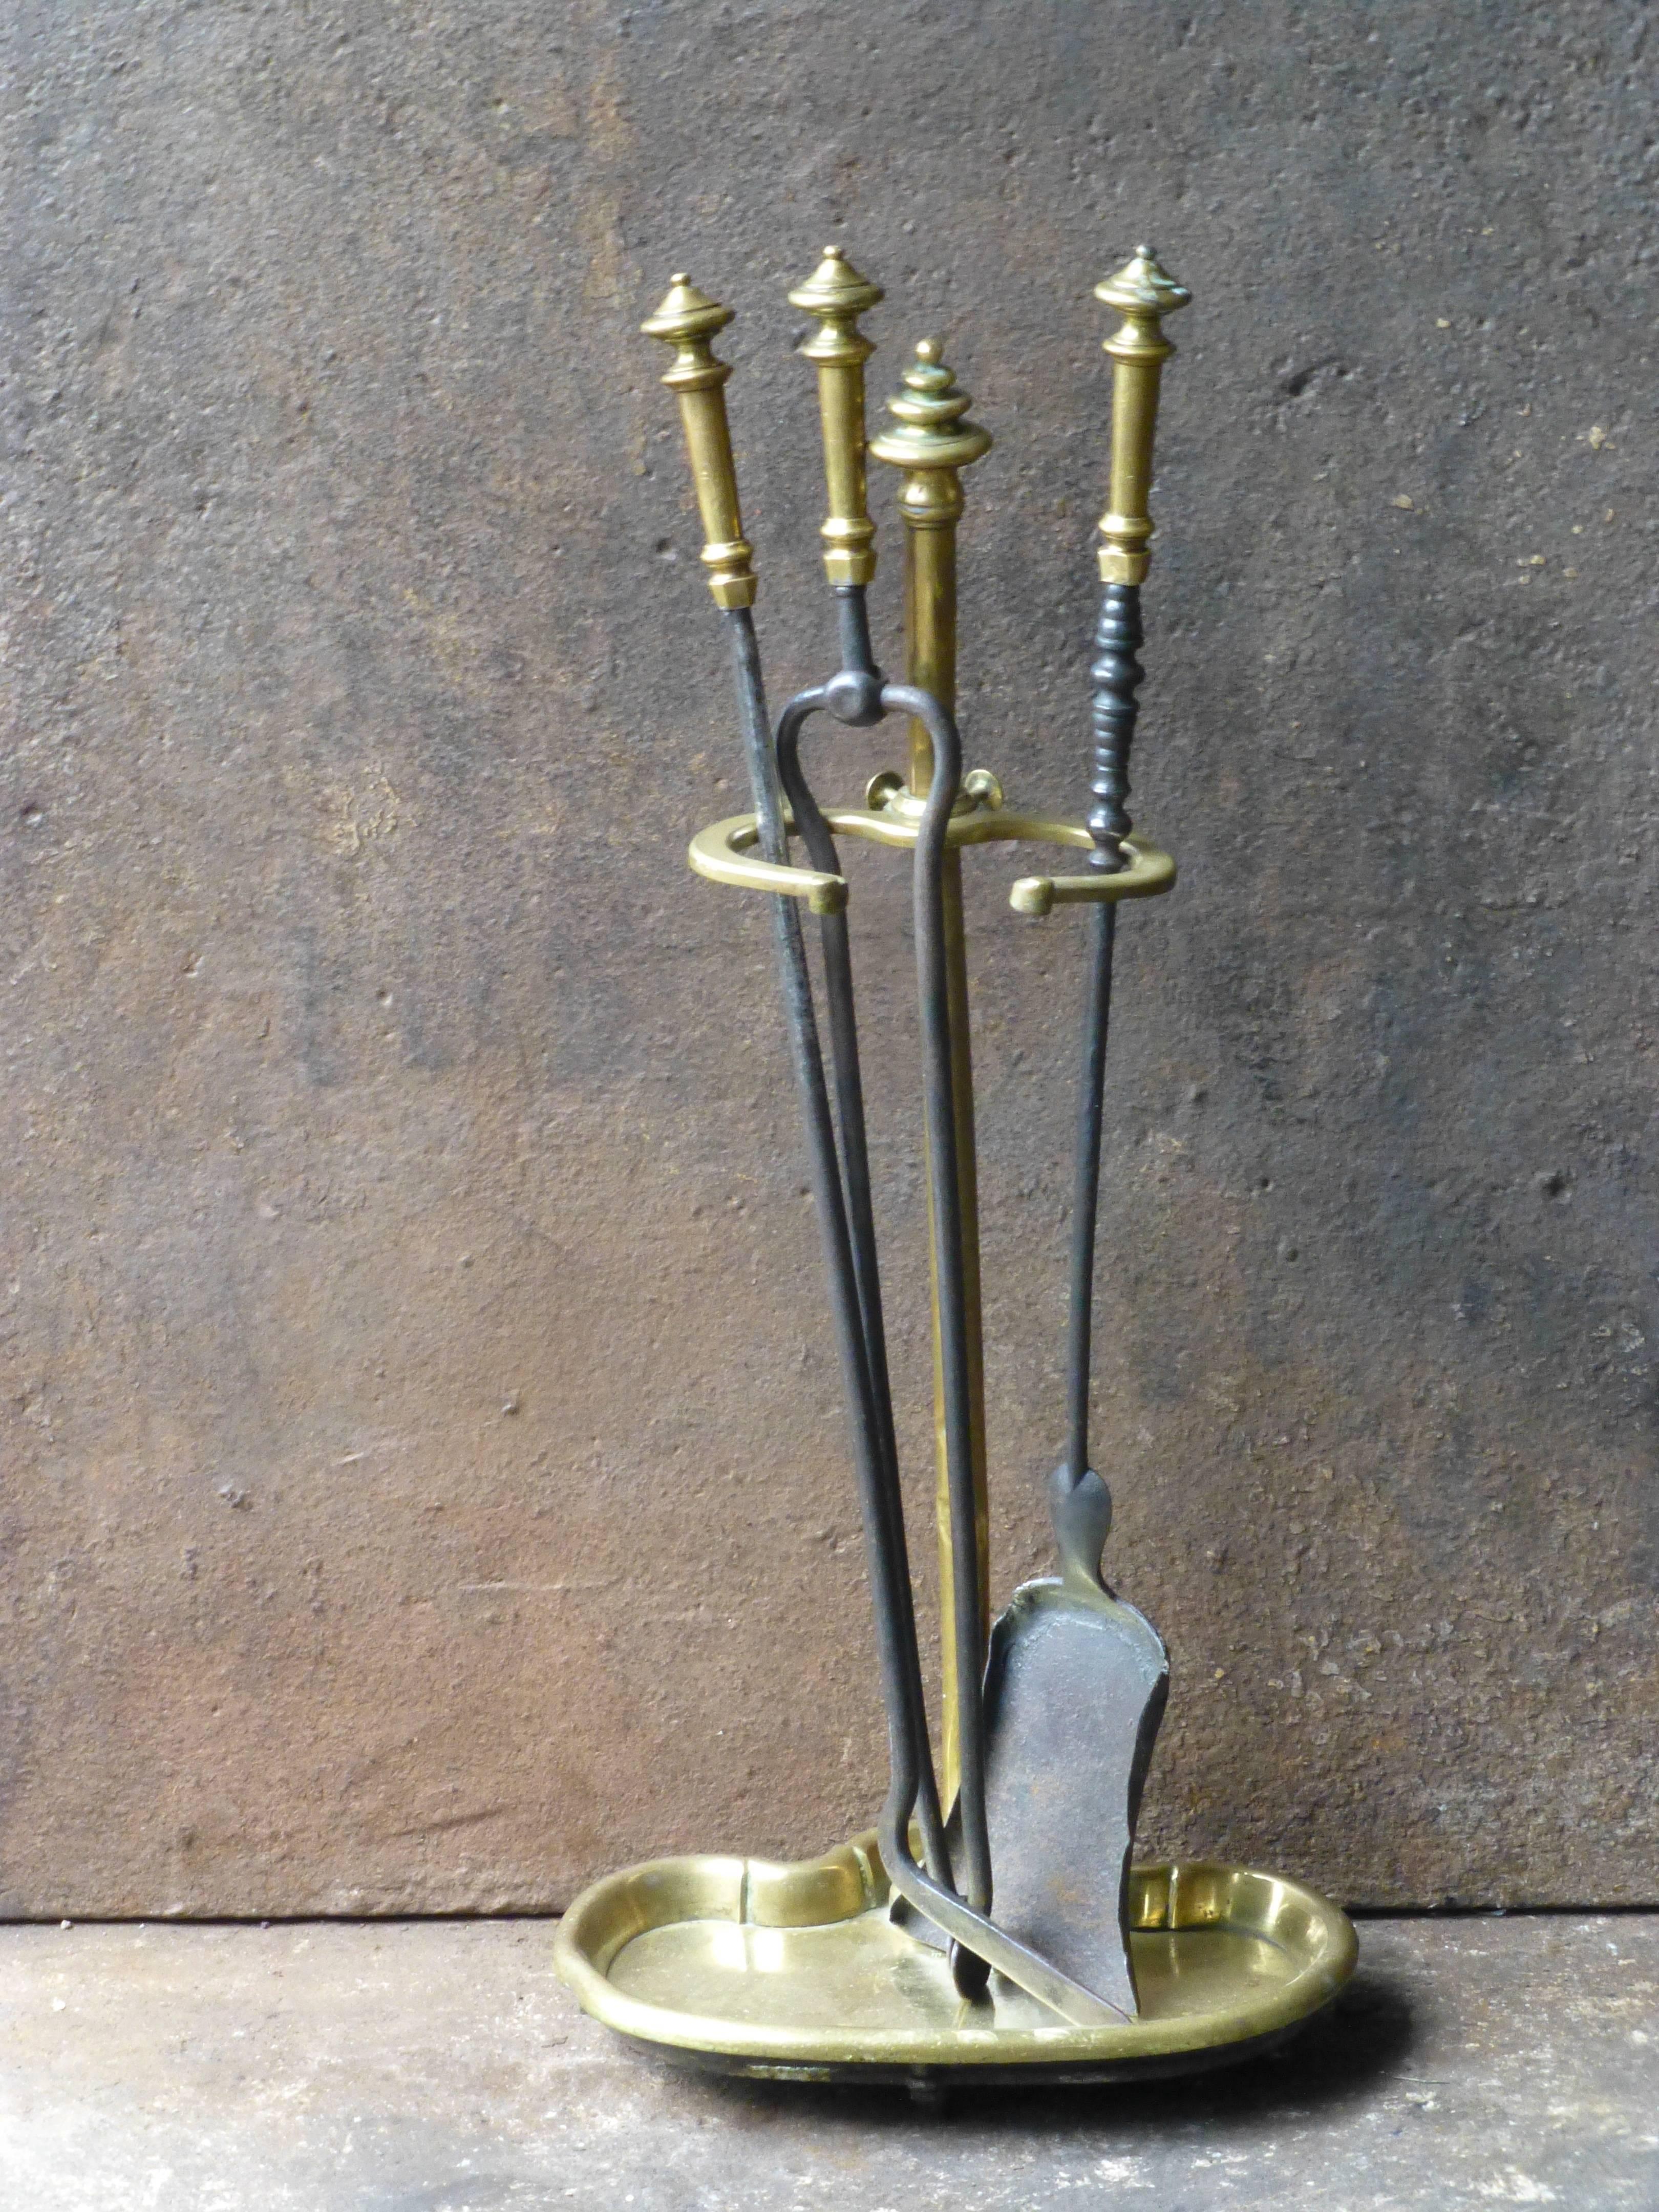 19th century English fireplace tool set or fire tools made of brass and wrought iron.